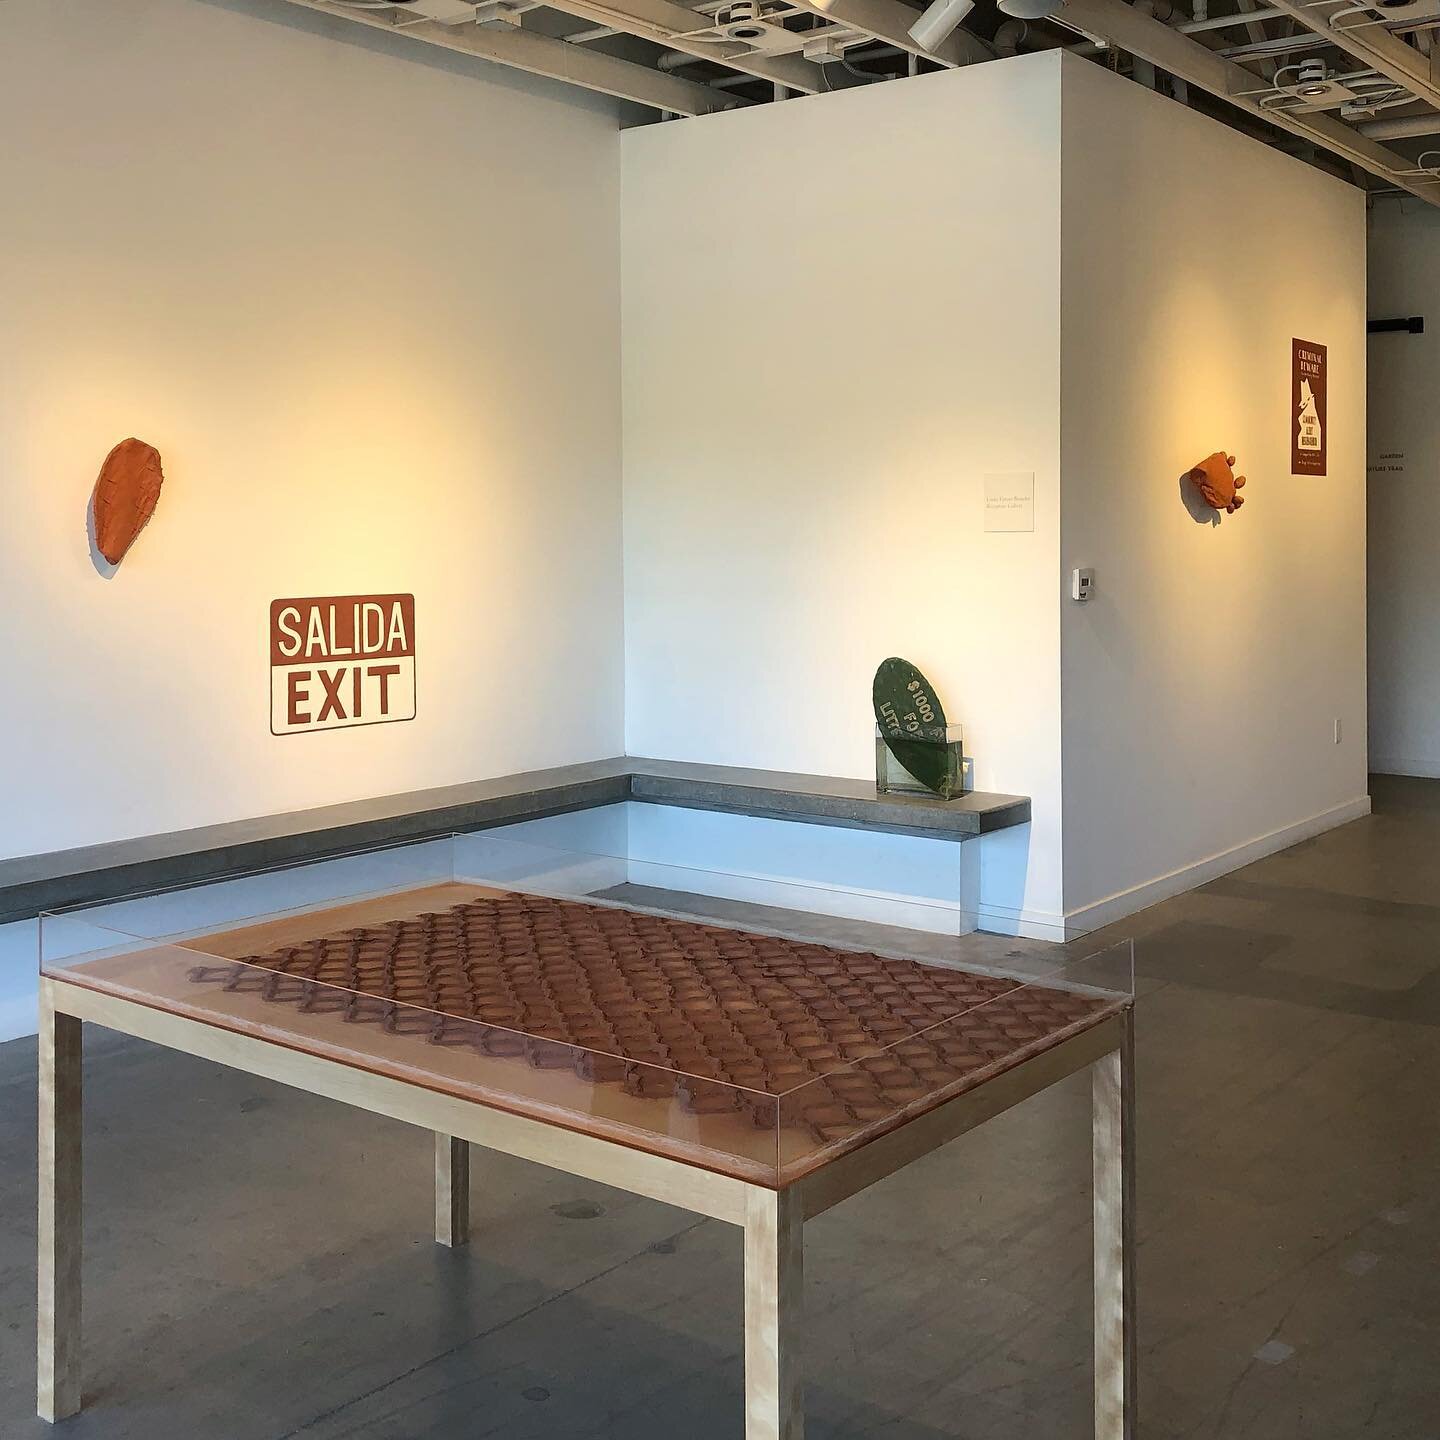 Took a little day trip to San Diego to check out the latest shows at @icasandiego, including their newest additional location formerly known as the Lux Art Institute. Totally appreciated the current show on view with @pimienta323! Loved all the nopal